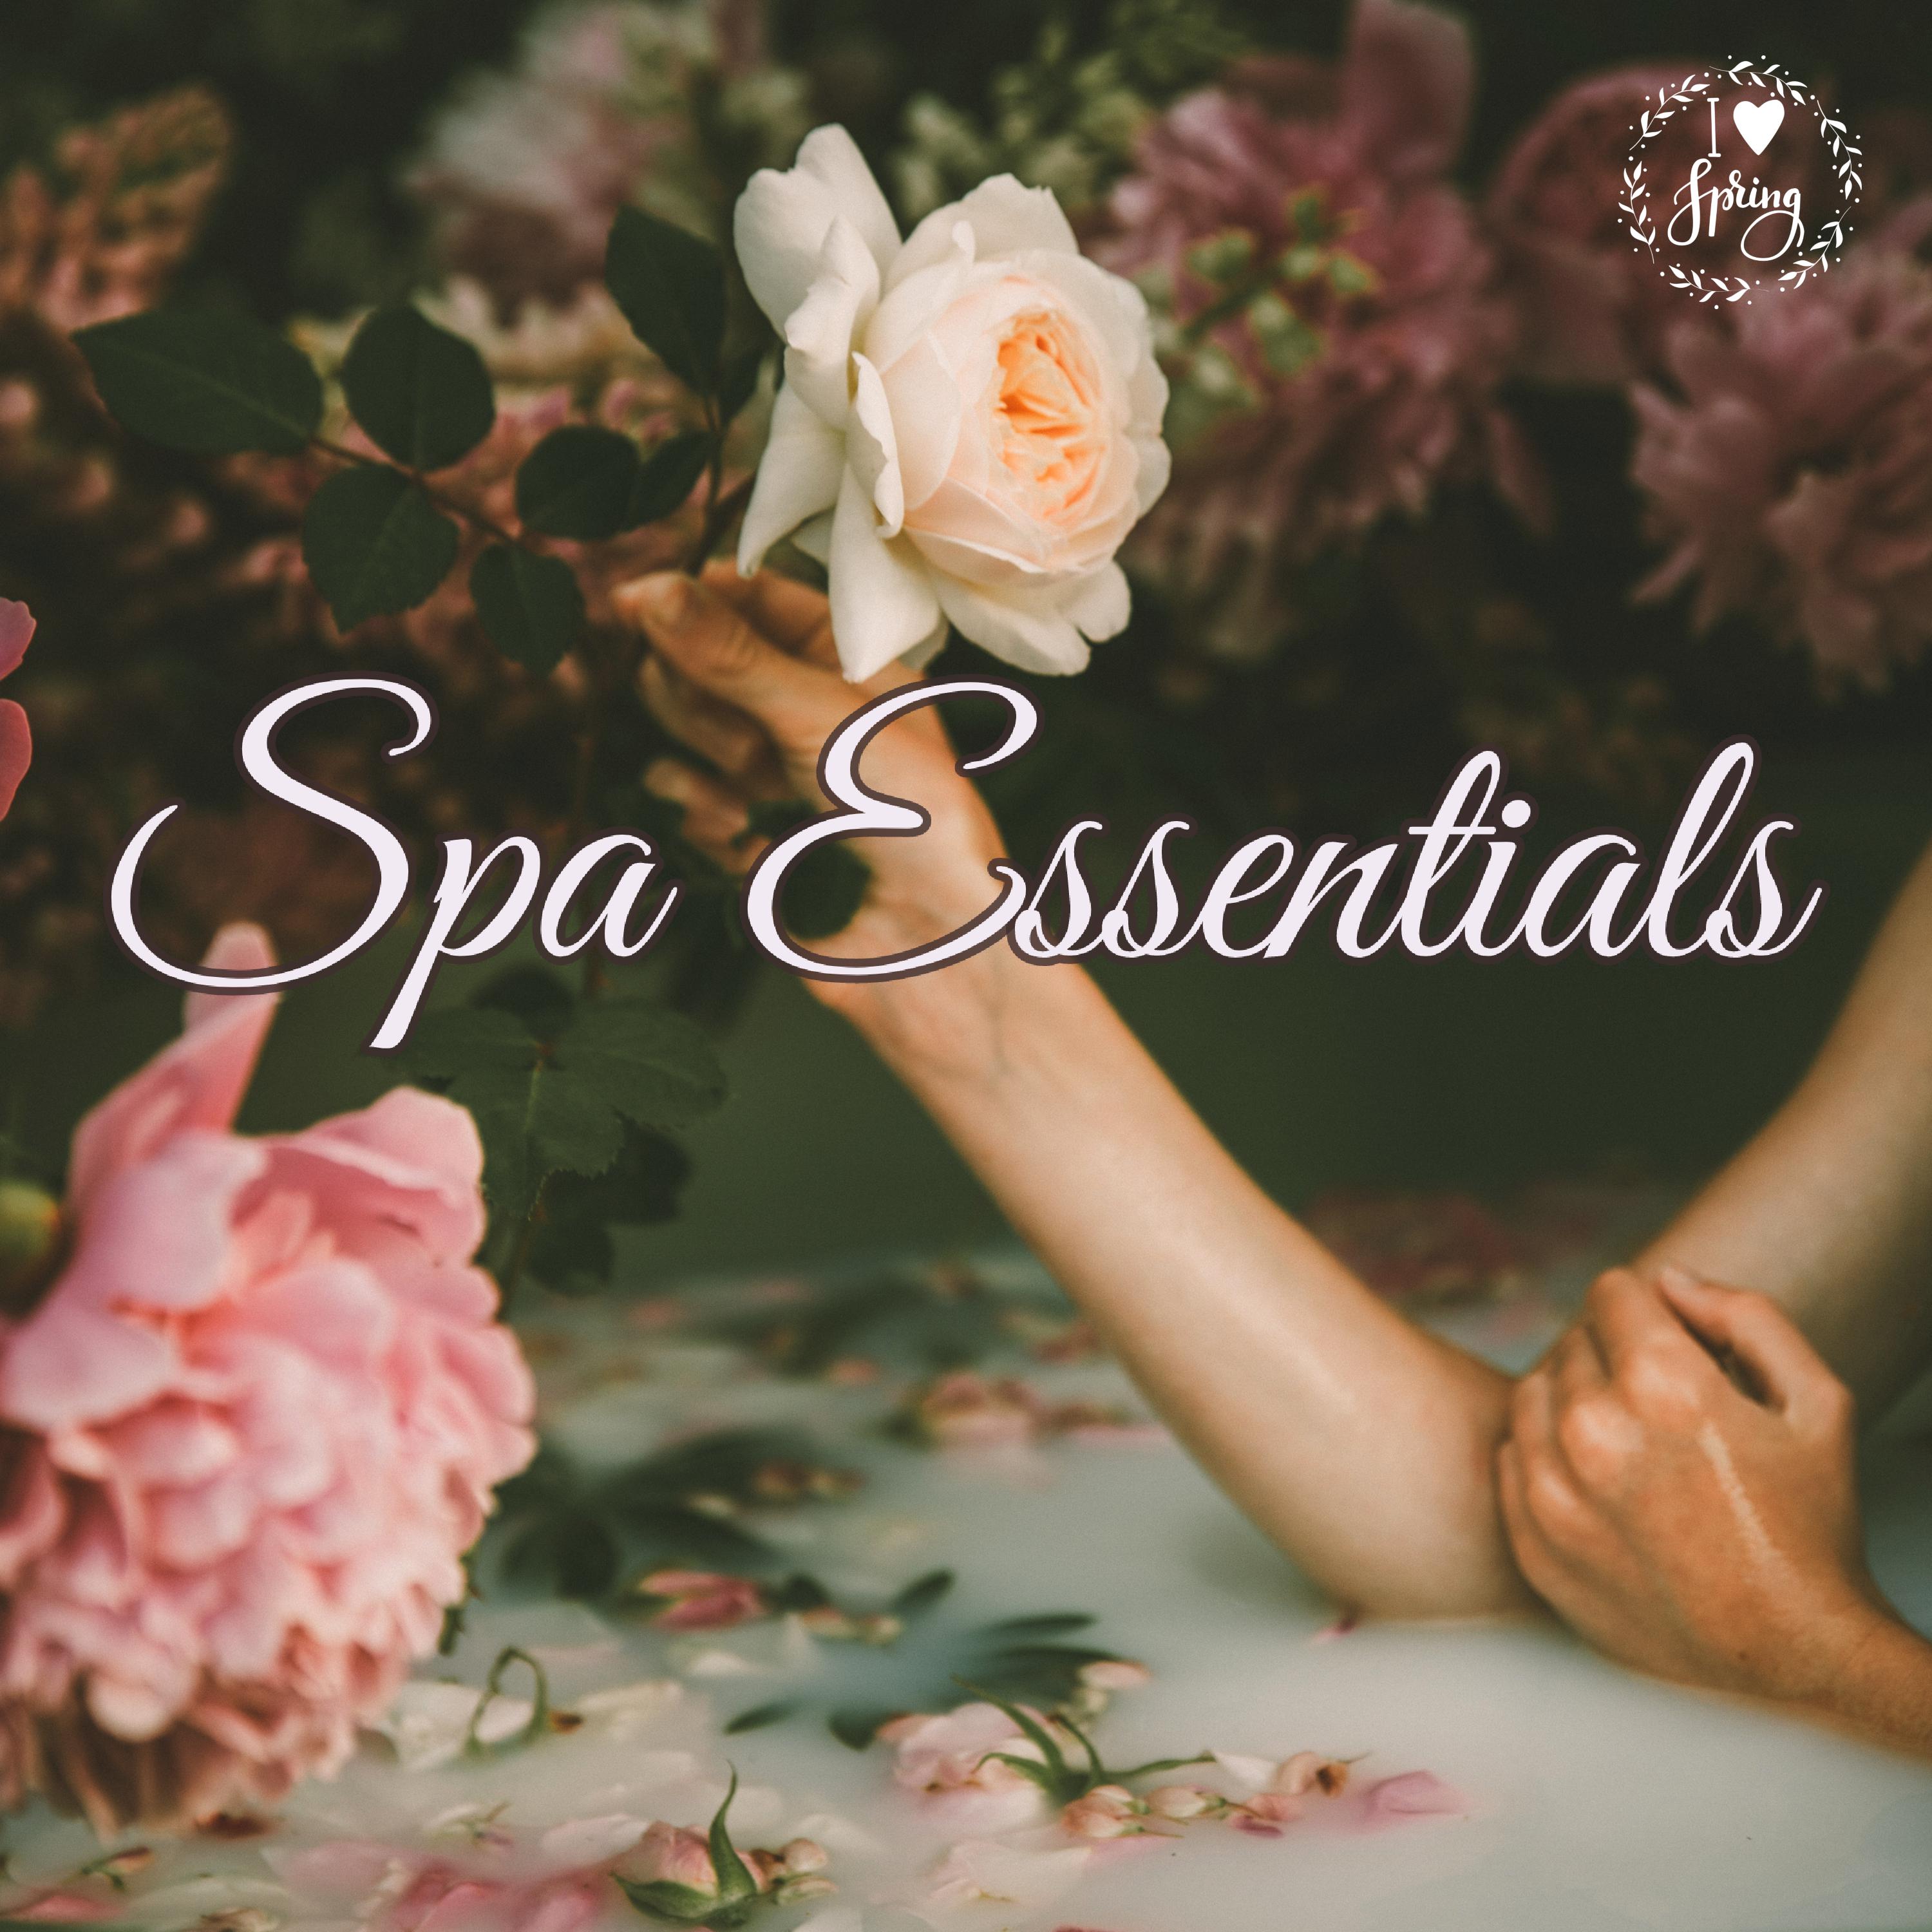 Spa Essentials – Amazing Relaxing Music for Massage, Total Relax, Spa Resort Soundscapes